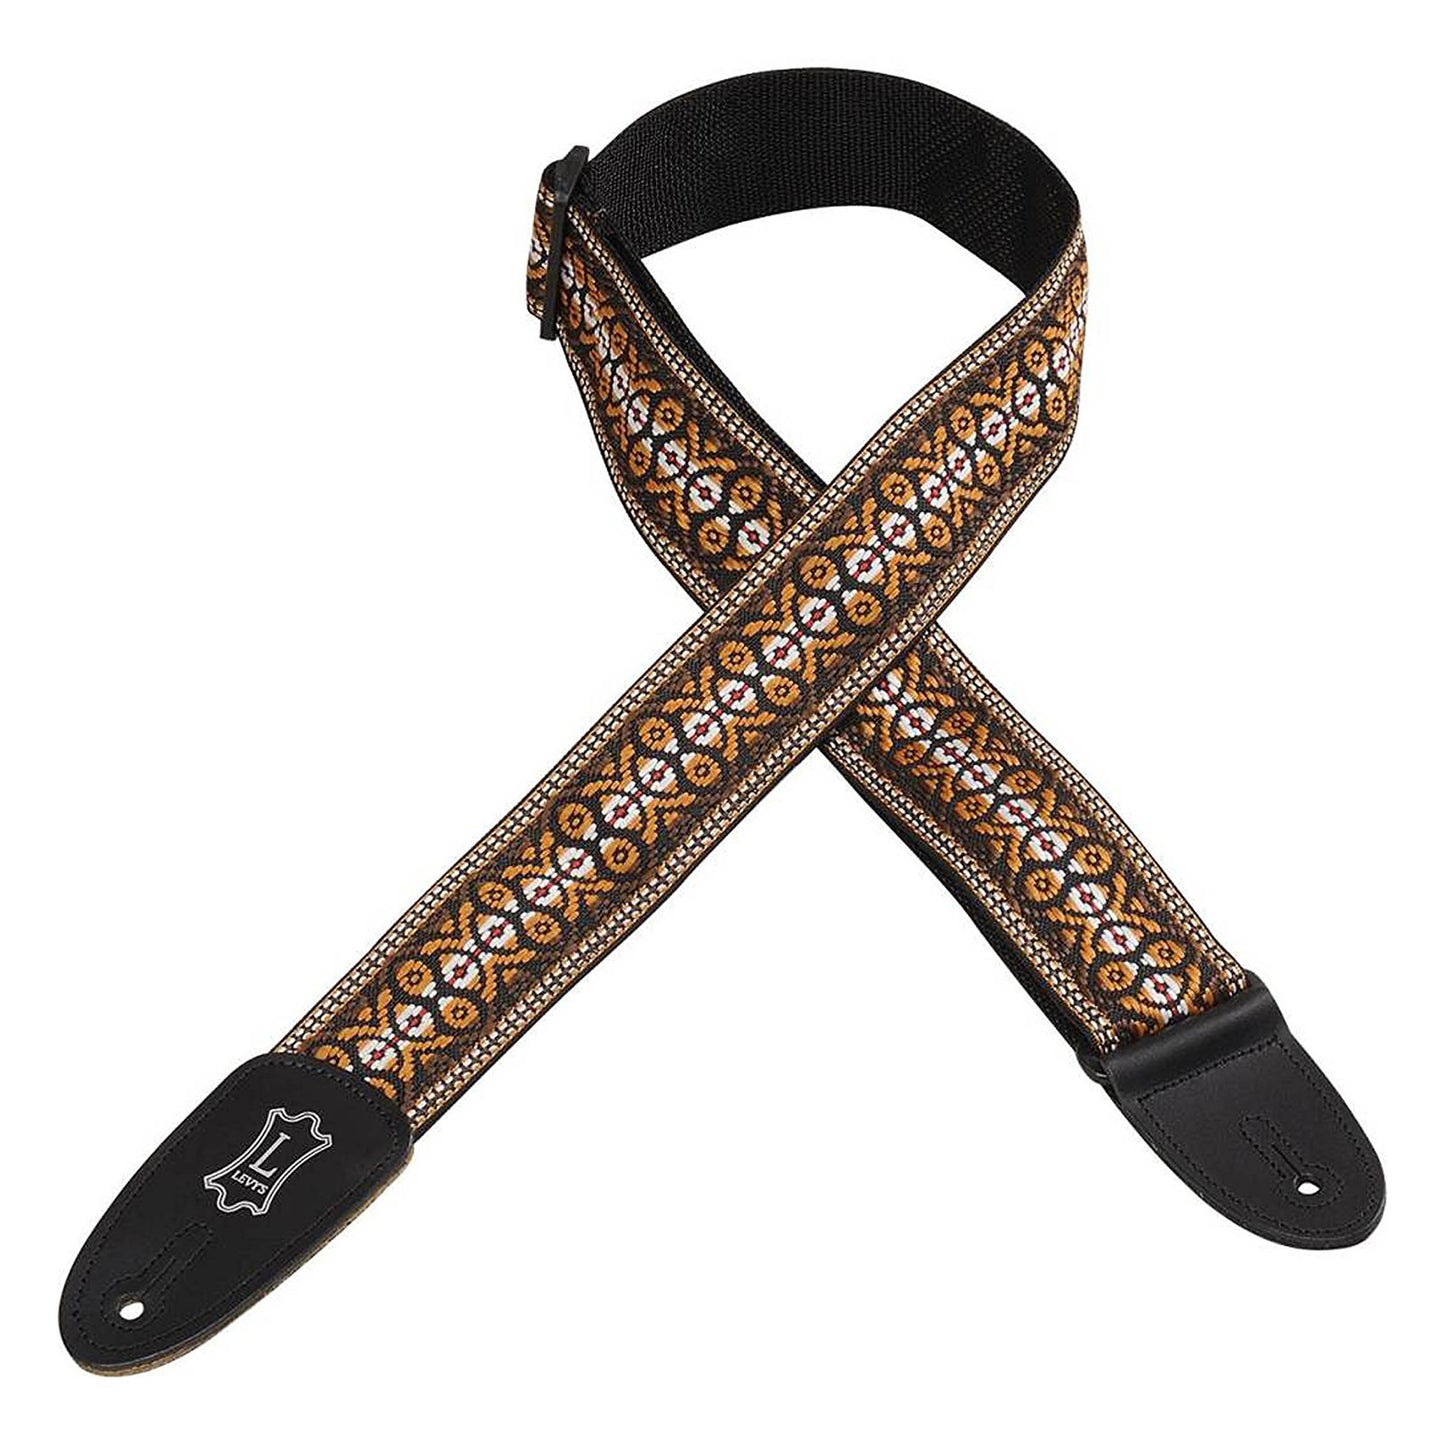 Levy's Leathers M8HT-20 2" Jacquard Weave Hootenanny Guitar Strap